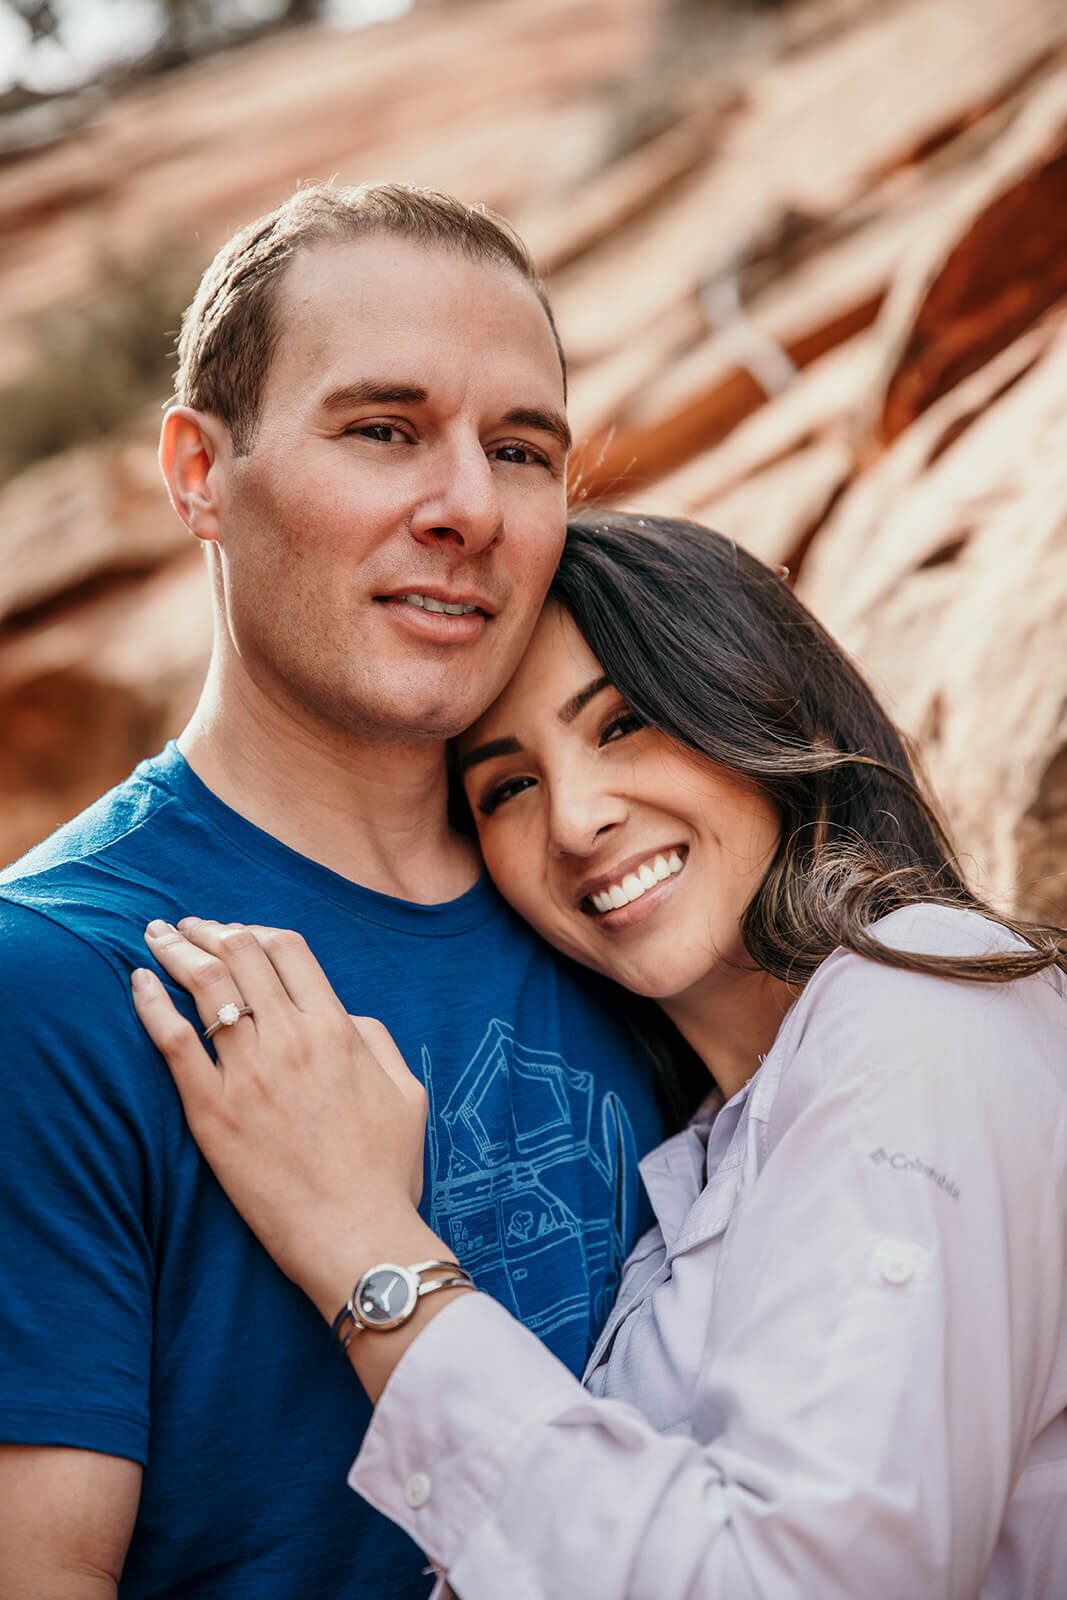  Eloping couple explore canyon outside of Zion National Park. Zion National Park engagement photographer 